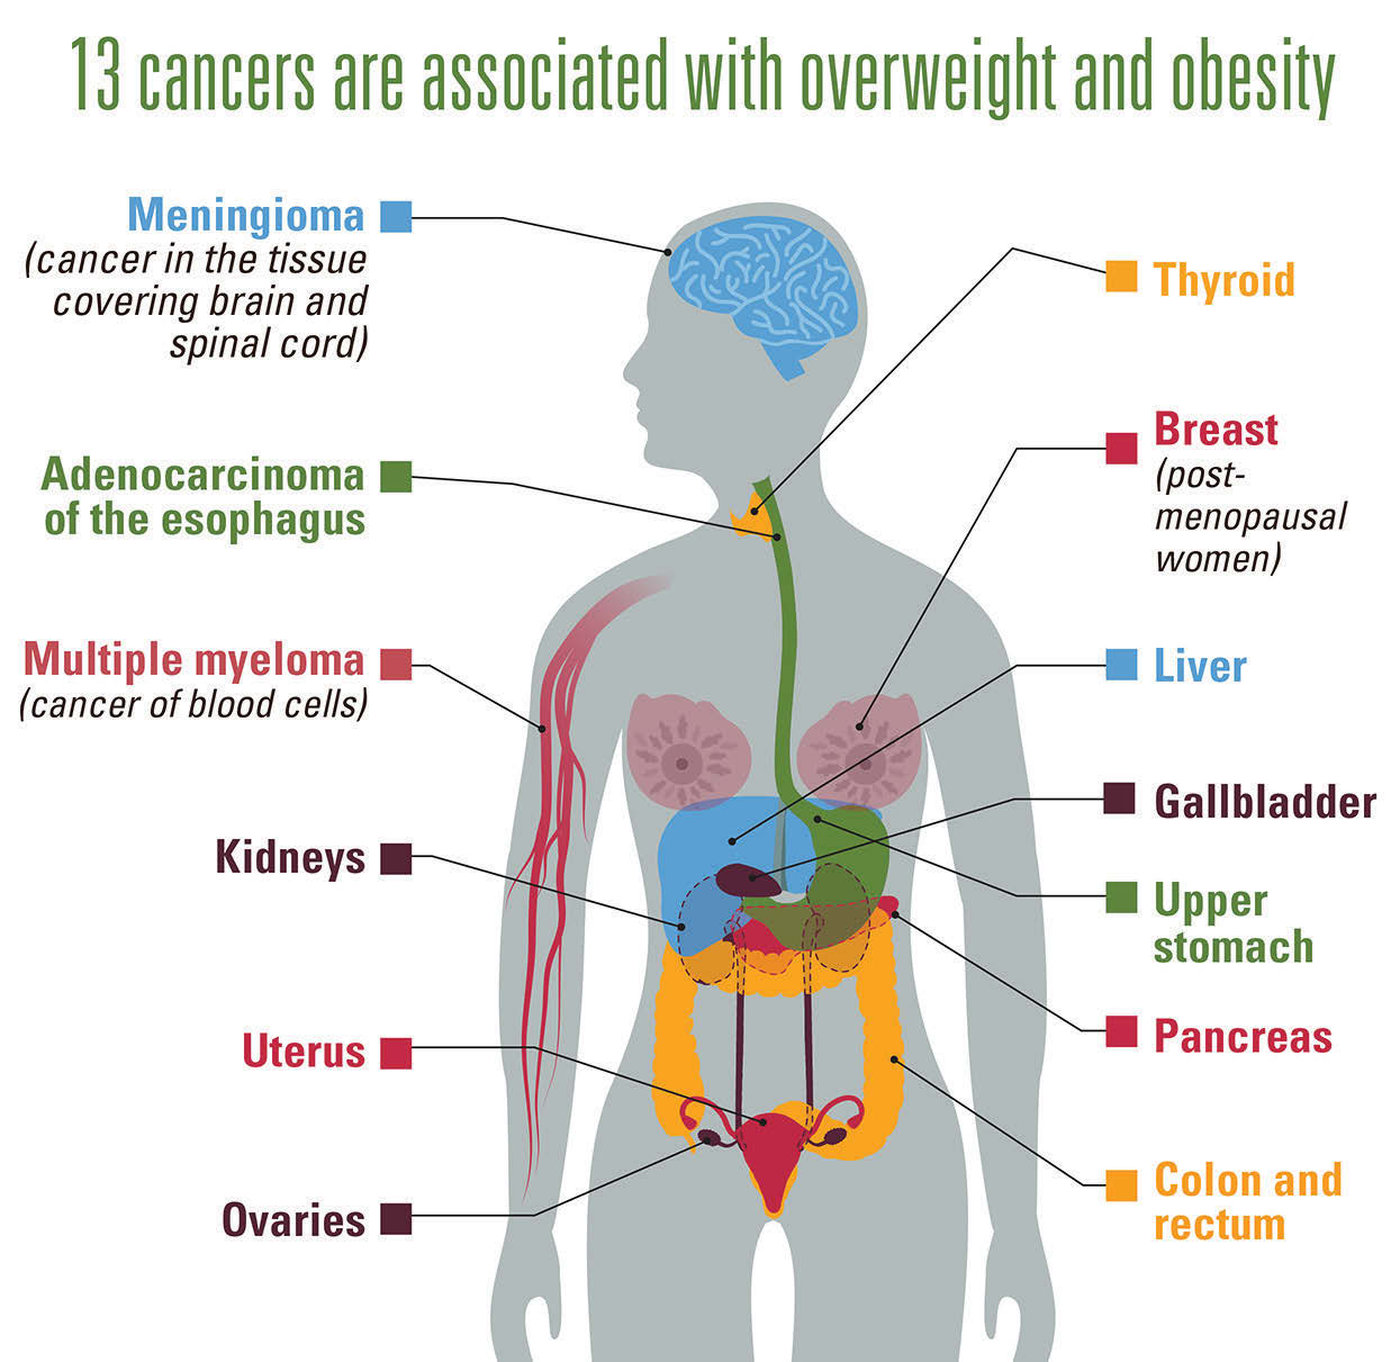 Excess weight: an important cause of cancer.